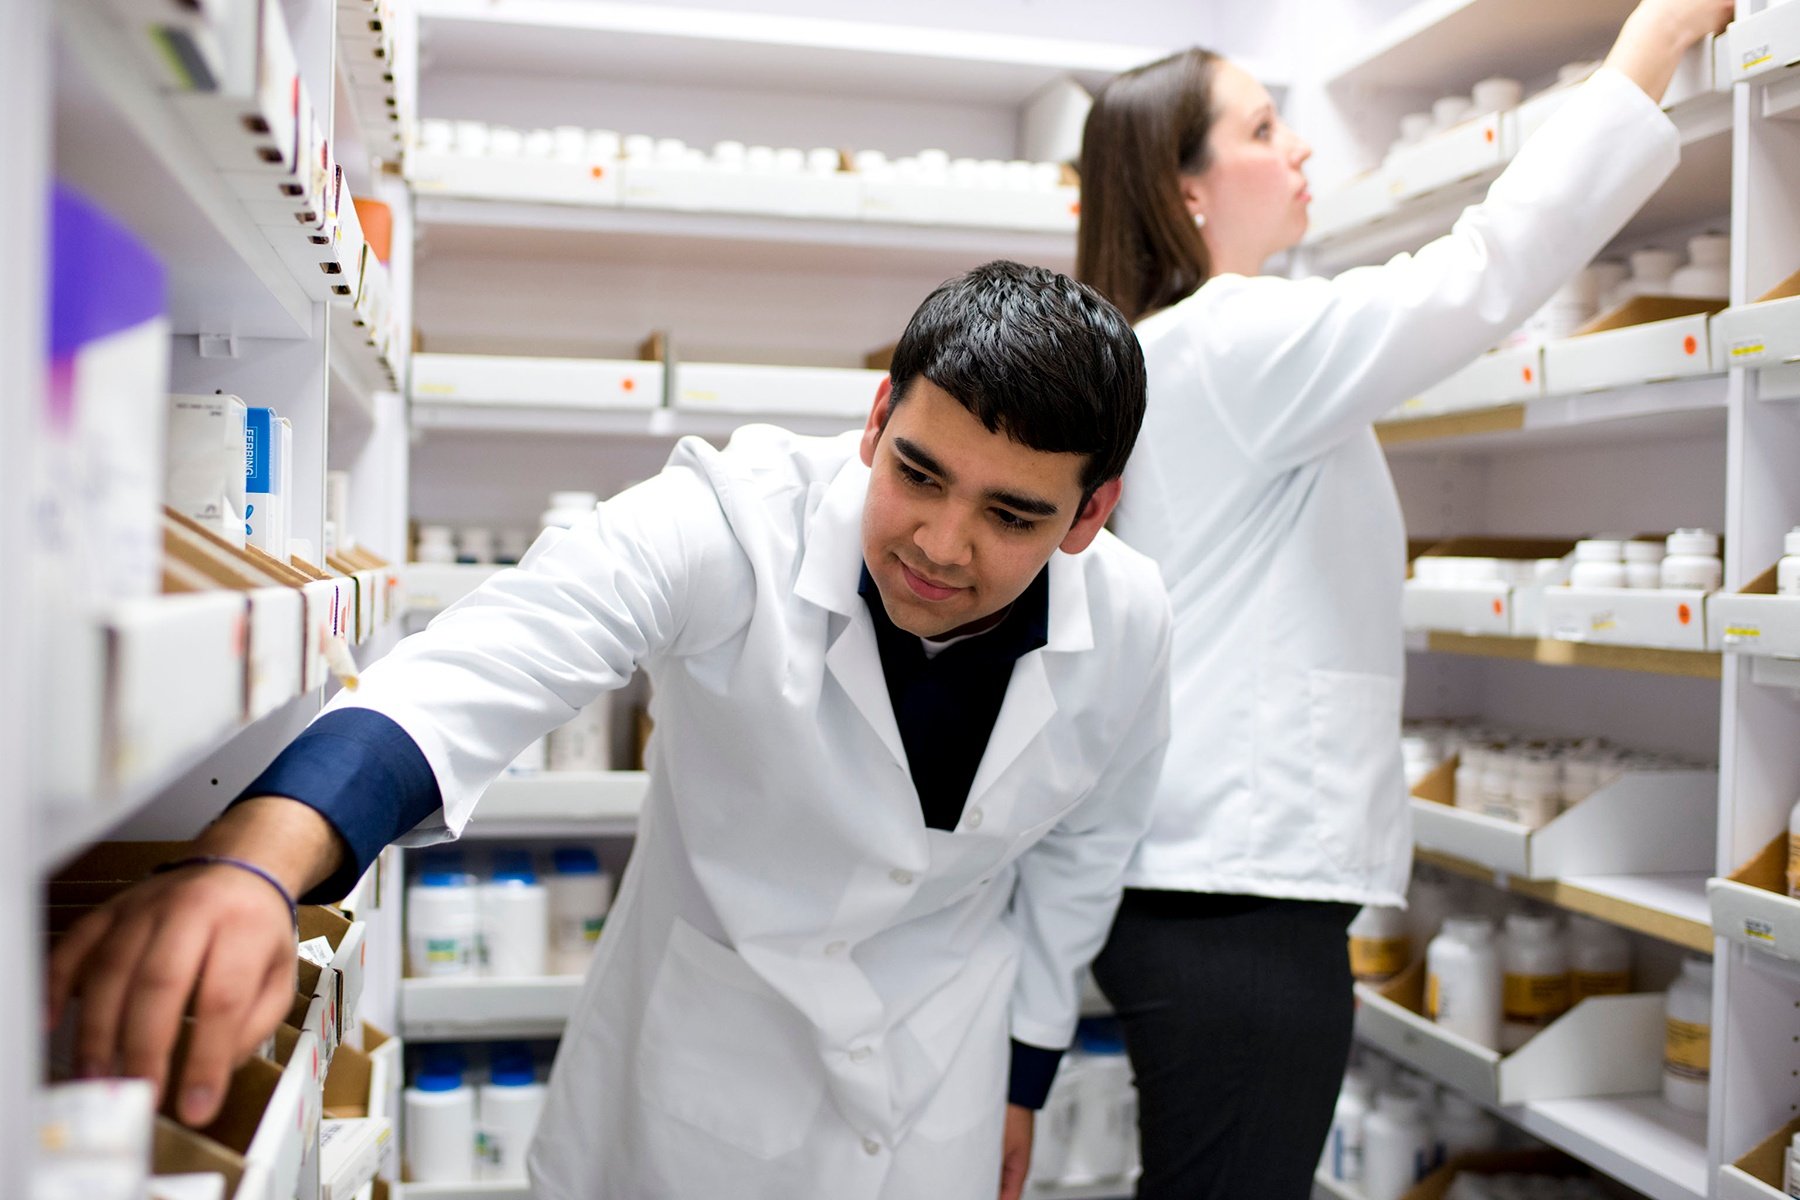 4 Ways You Can Celebrate Your Pharmacist